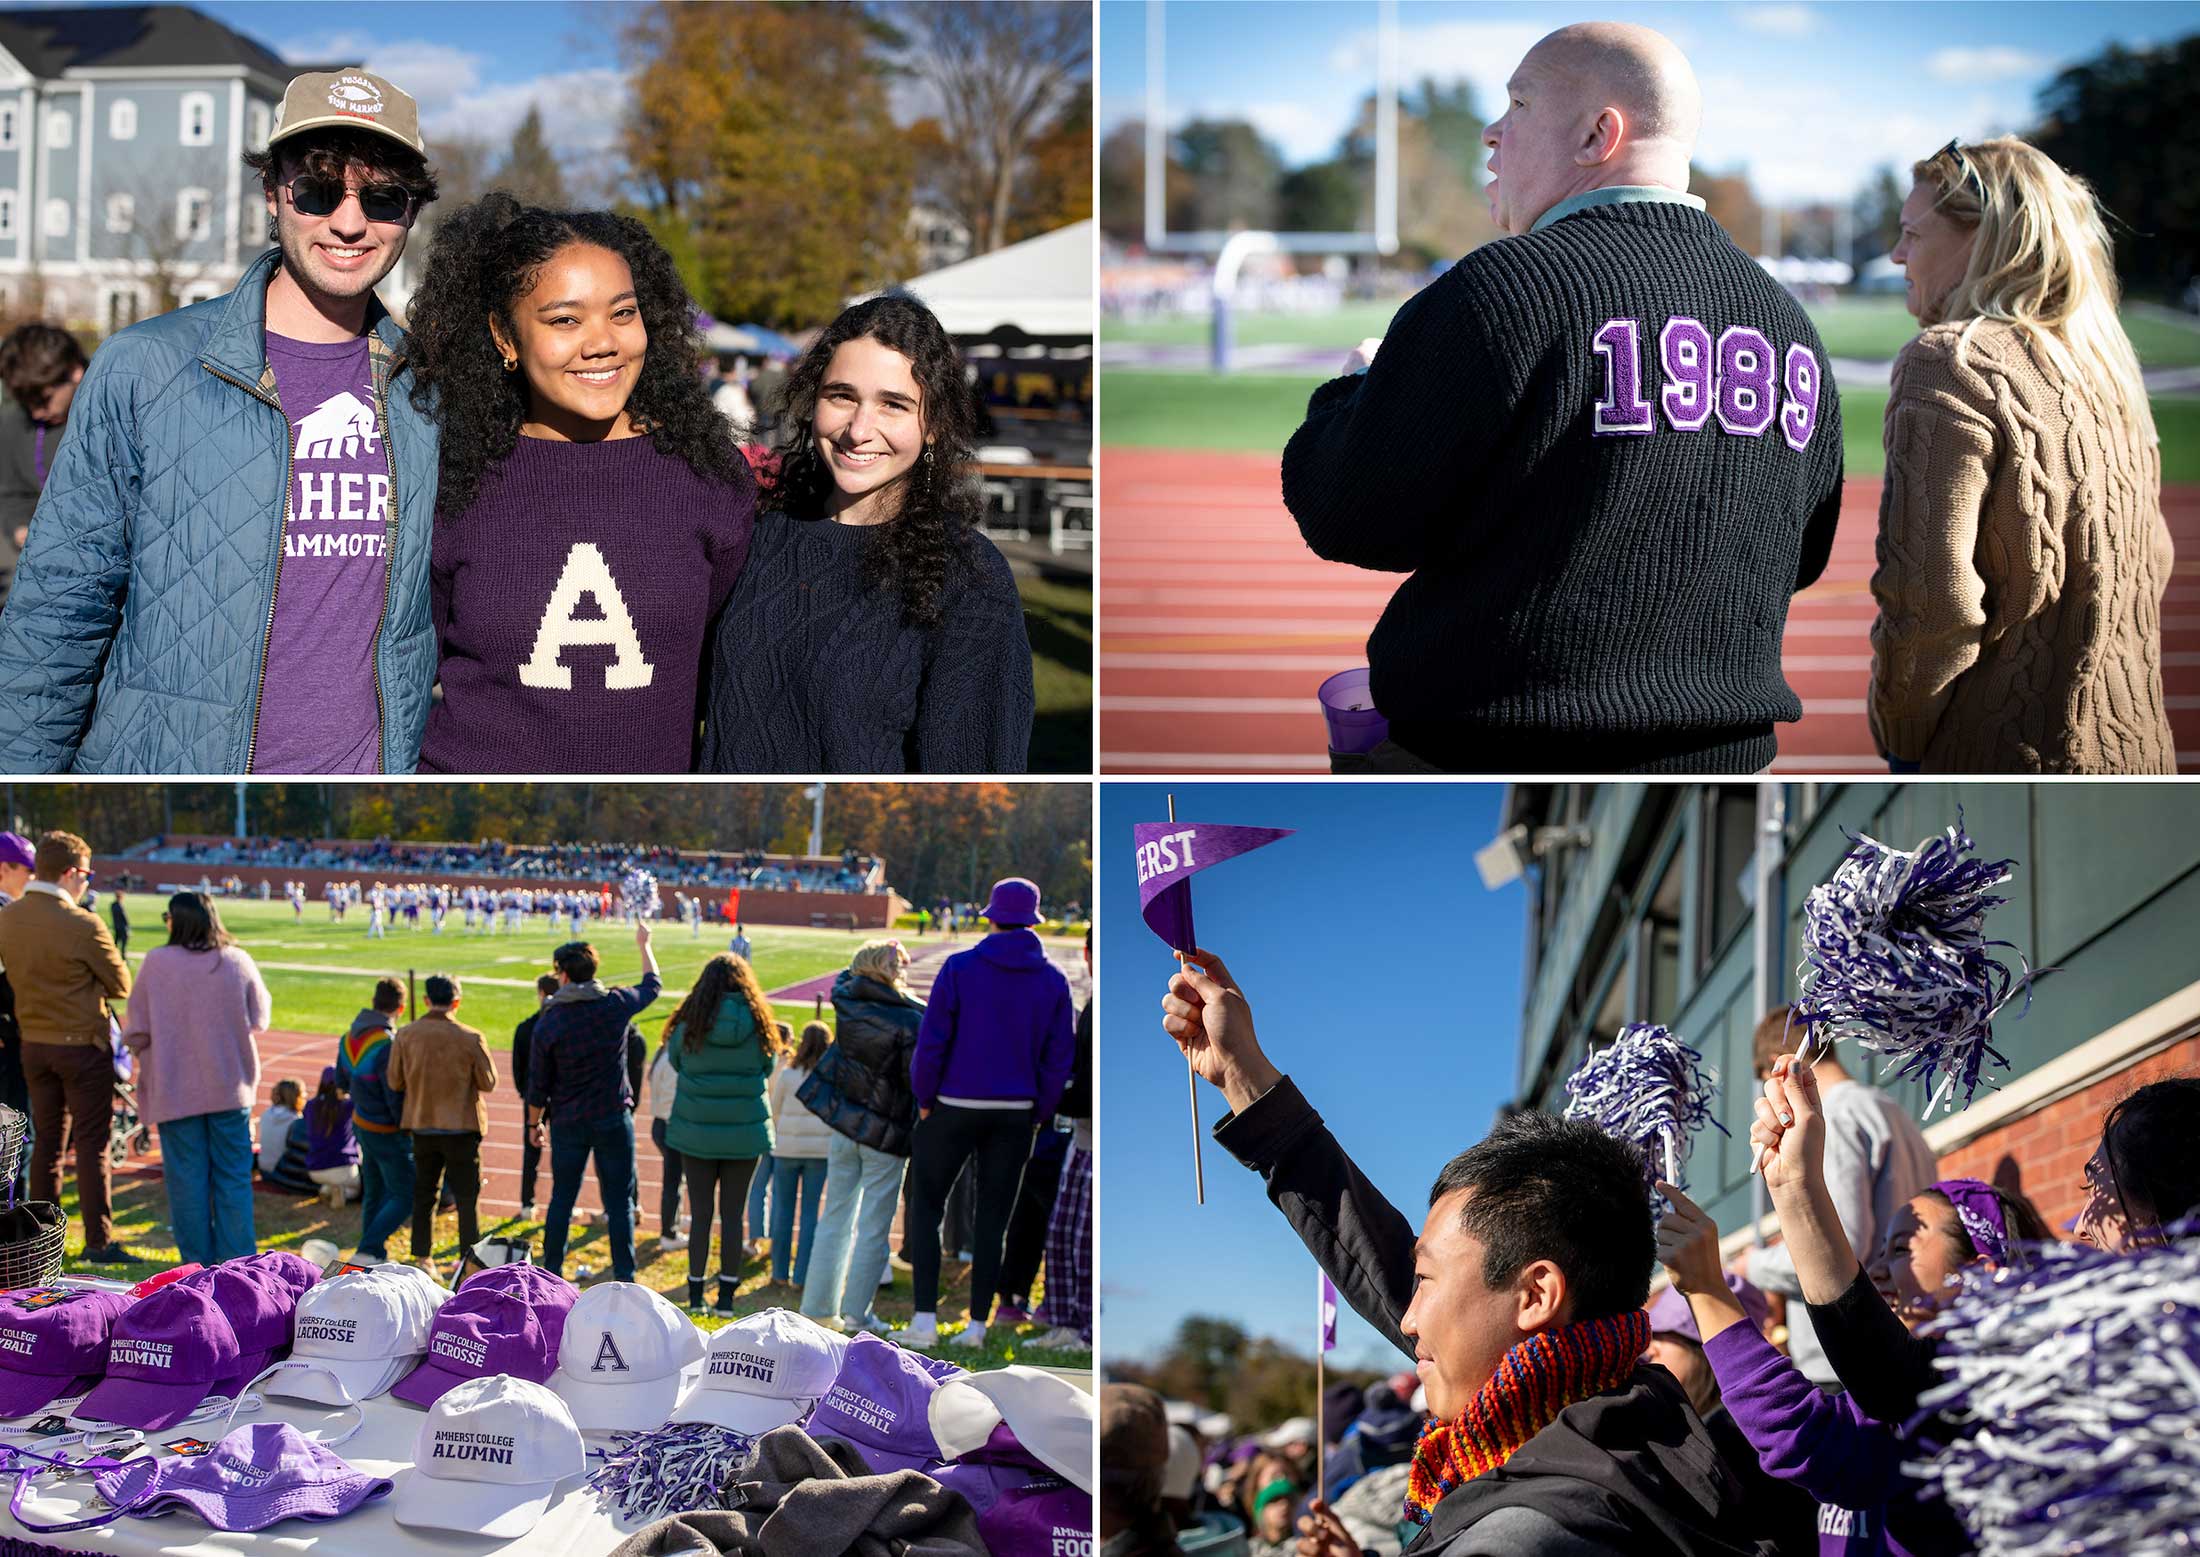 A collage of images showing fans at the Homecoing football game and lots of Amherst swag.